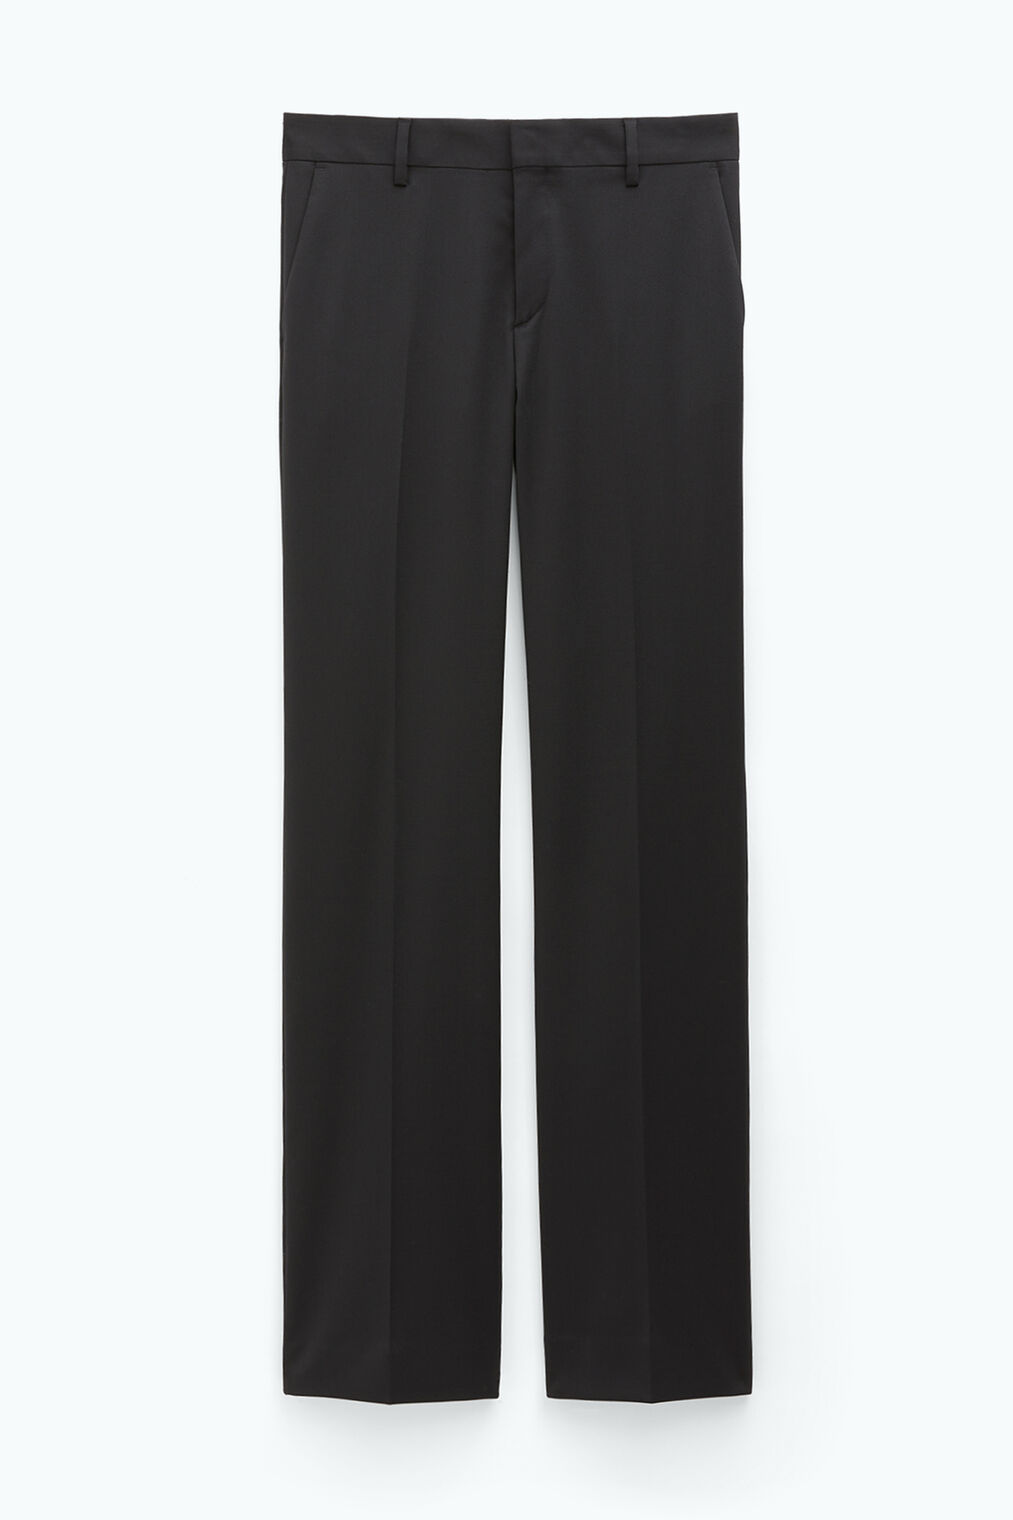 Bootcut trousers in black